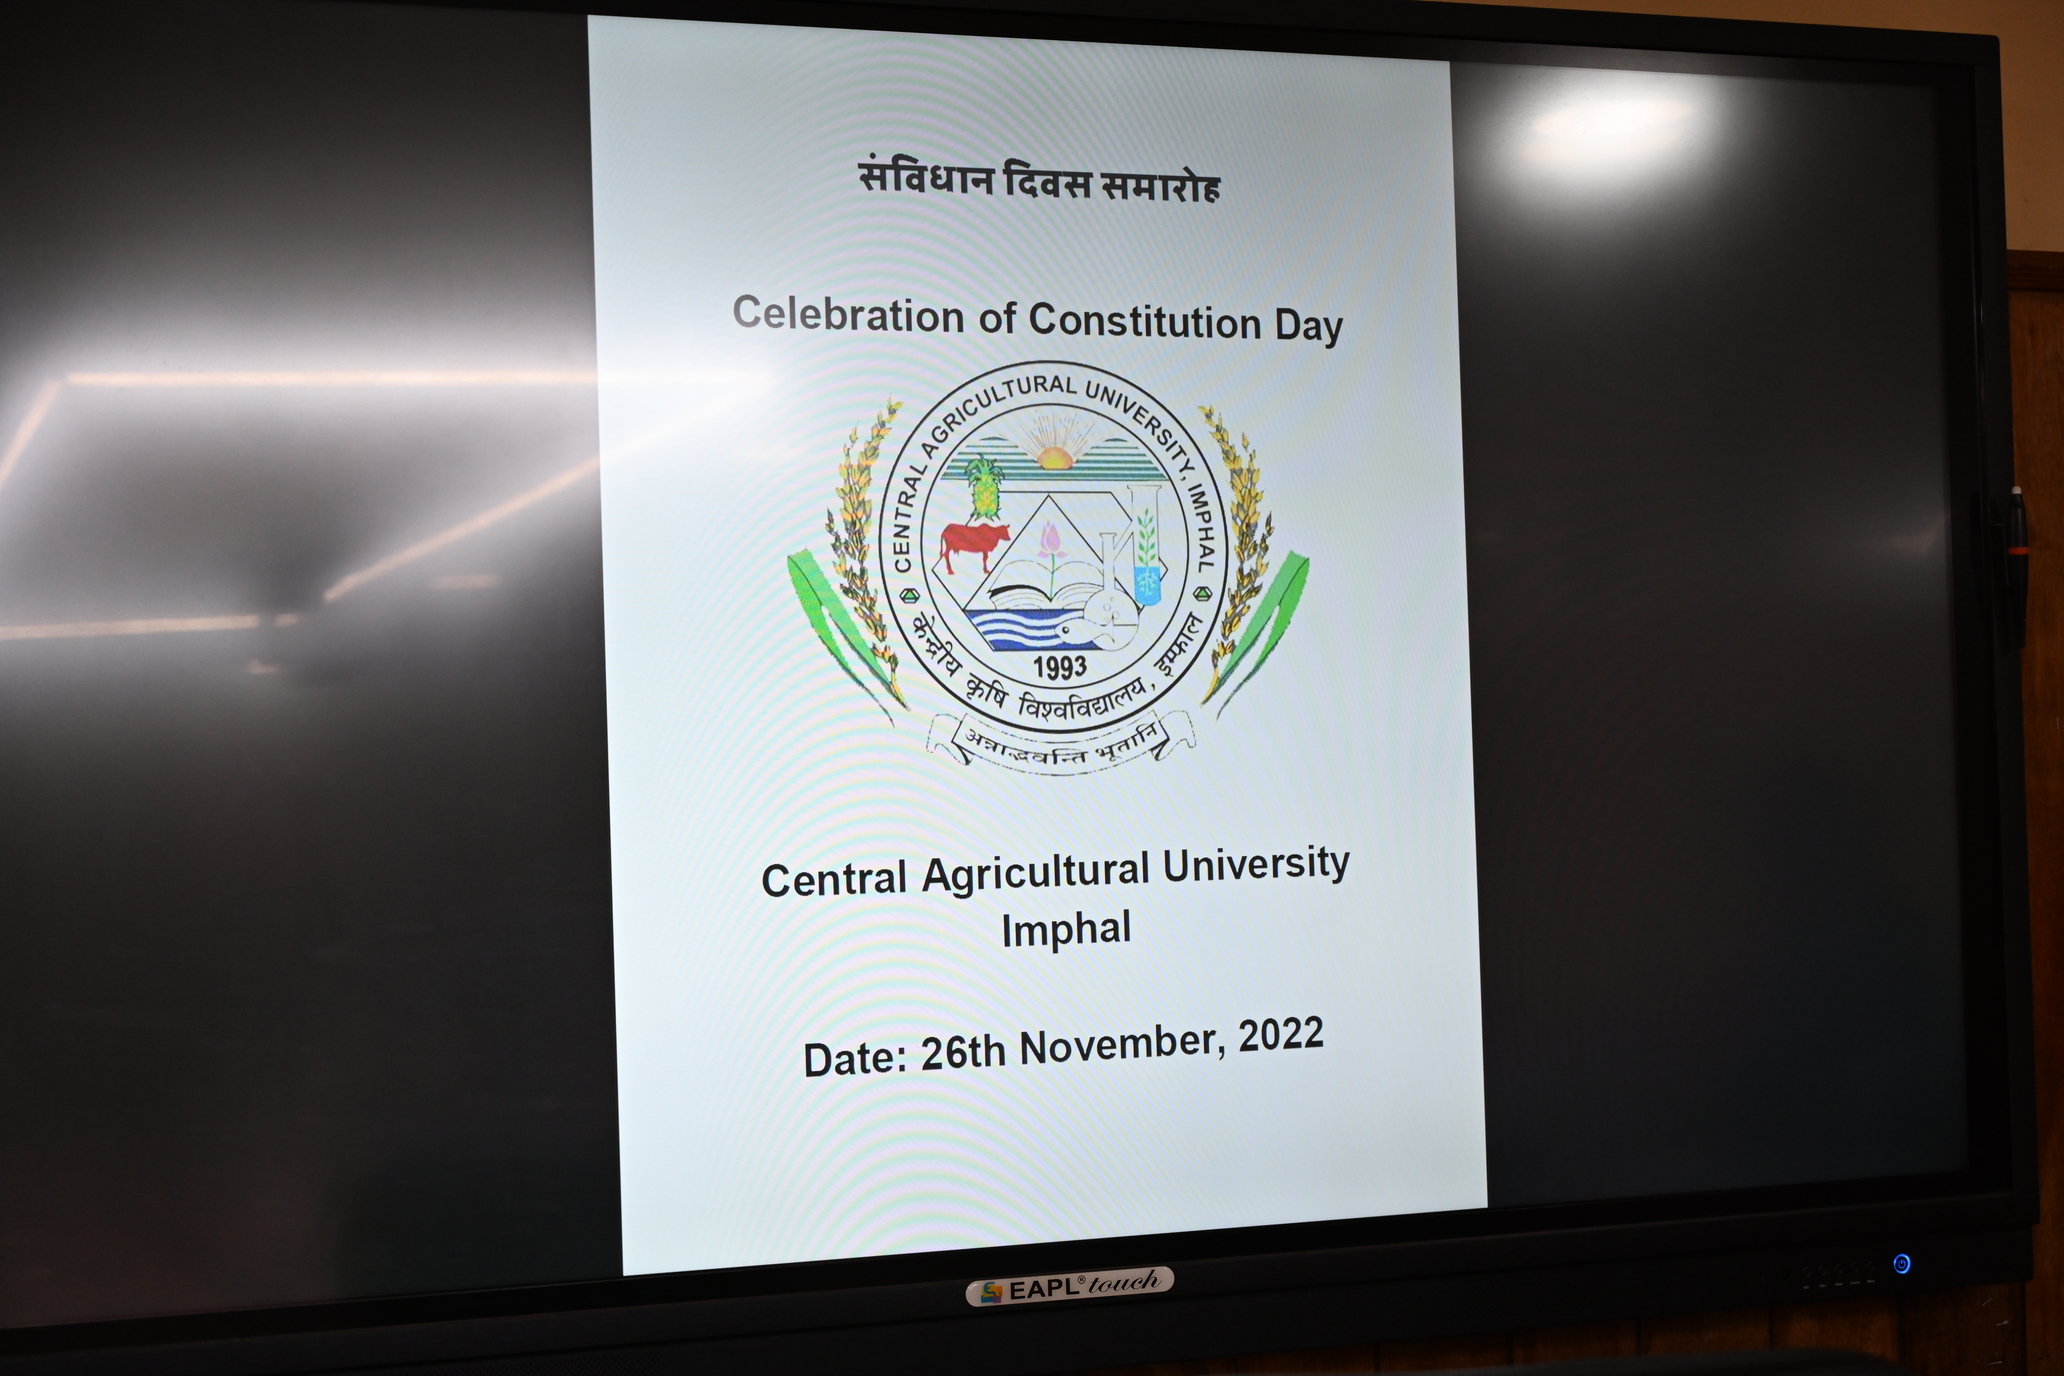 Central Agricultural University Imphal observed the Constitution Day on 26th November, 2022 at its Main Conference Hall at HQ, Lamphelpat